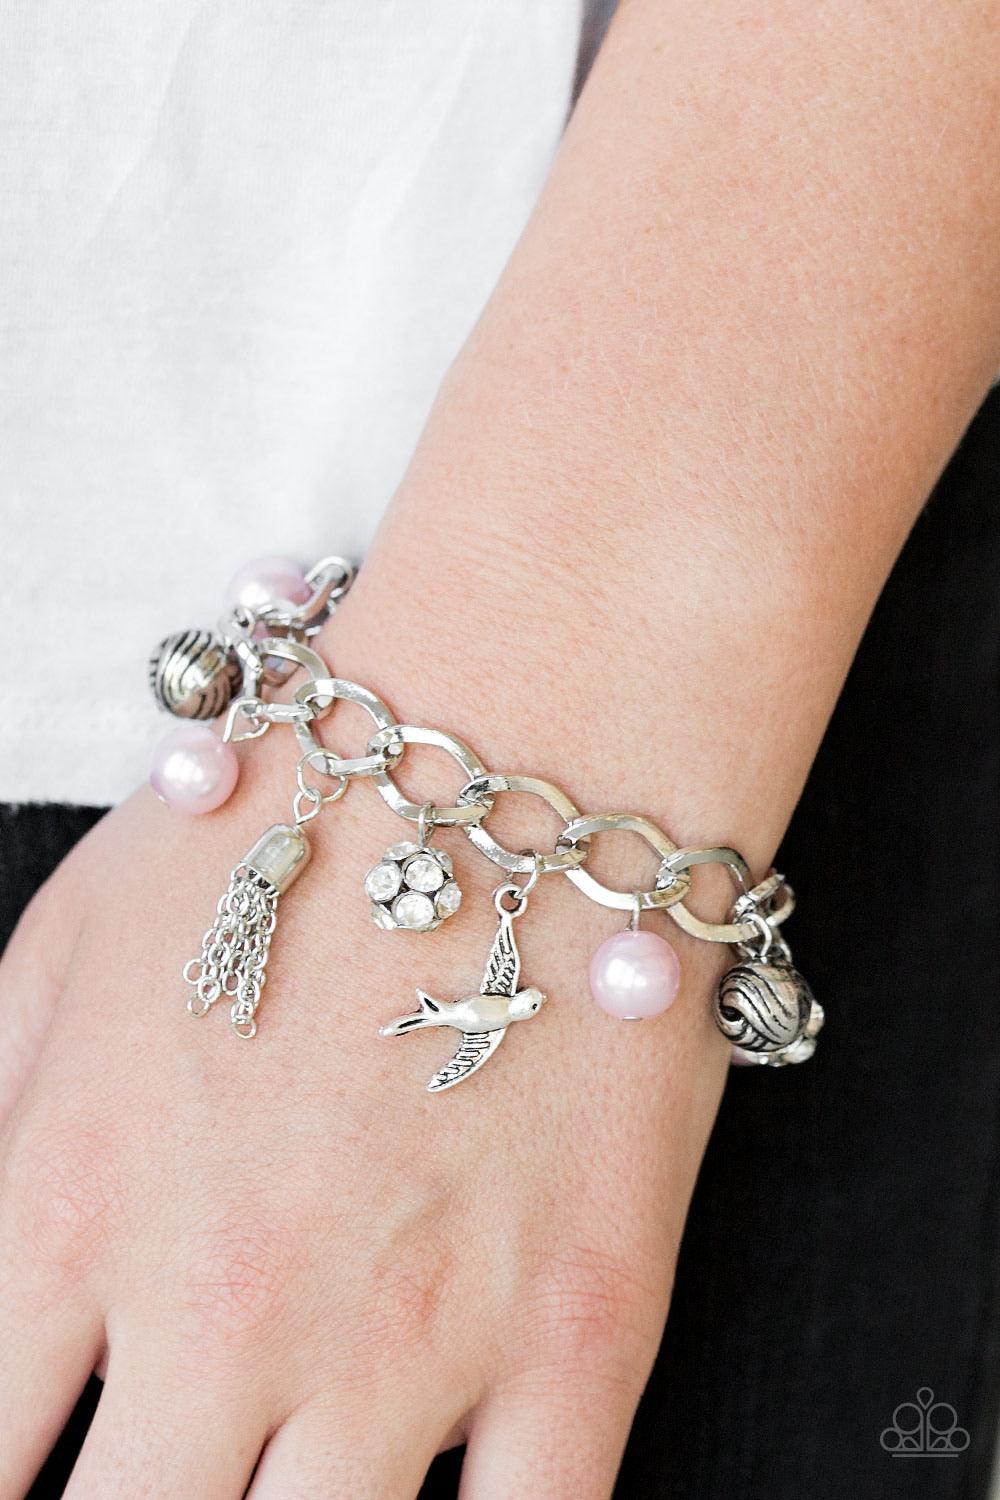 Paparazzi Accessories Lady Love Dove - Pink Pink pearls, ornate silver beads, and white rhinestone encrusted accents swing from a dramatic silver chain. A shimmery silver bird charm and silver tassel are added to the display, creating a whimsical fringe a